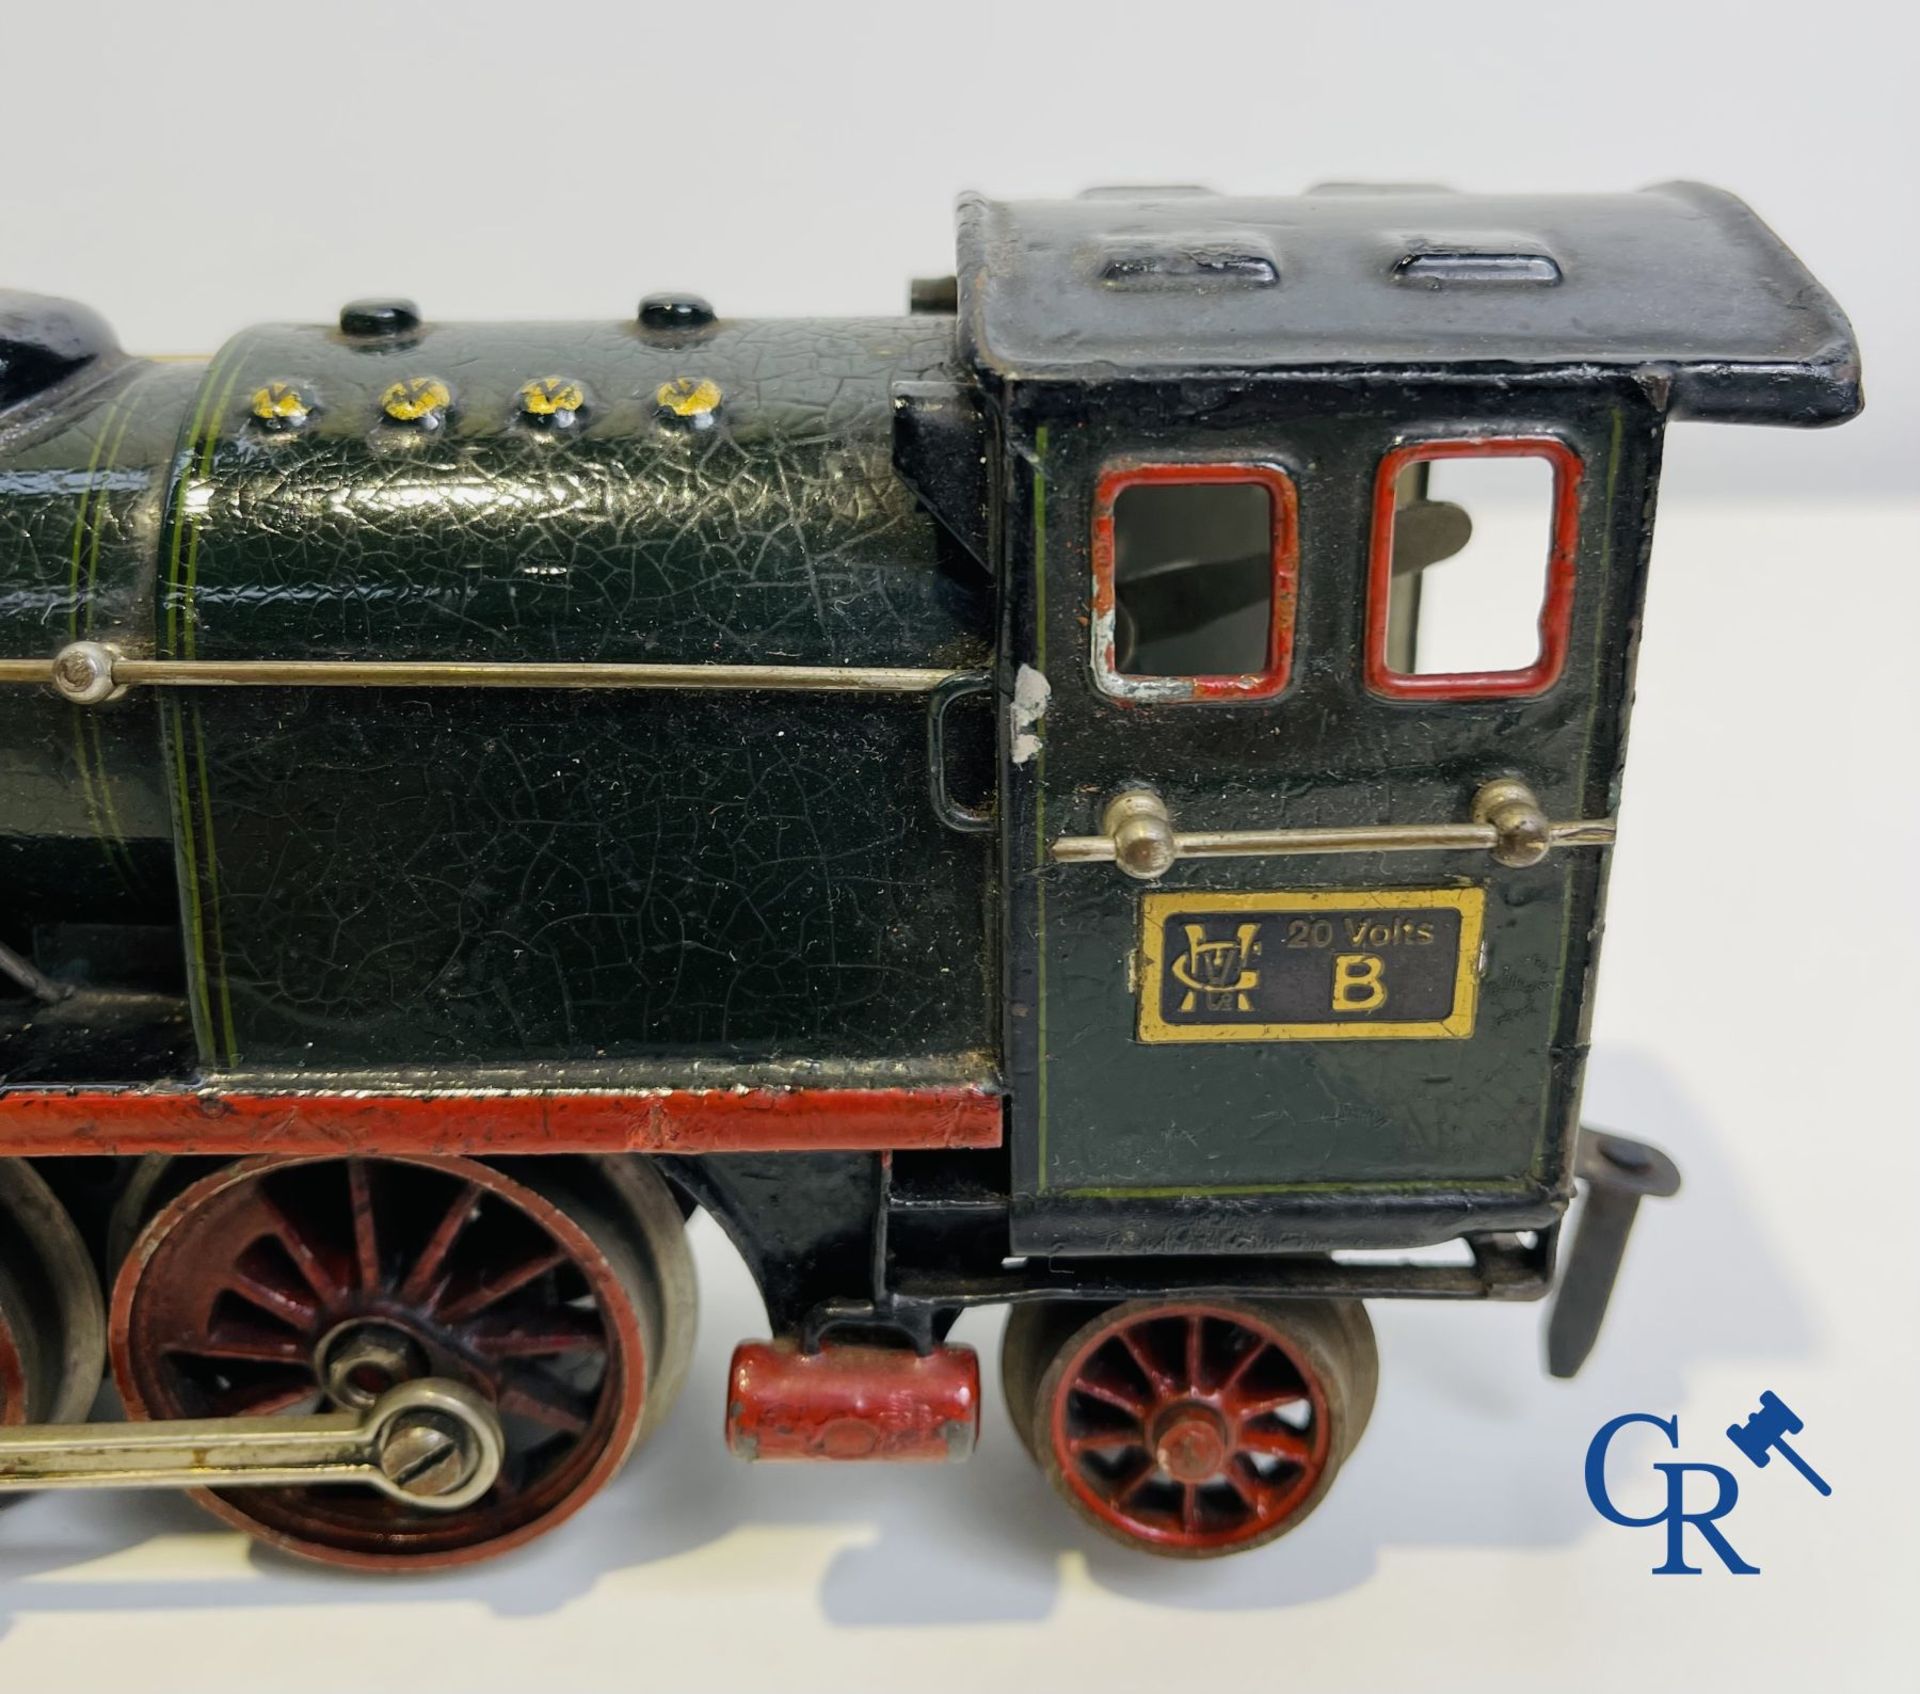 Old toys: Märklin, Locomotive with towing tender and dining car.
About 1930. - Bild 3 aus 32